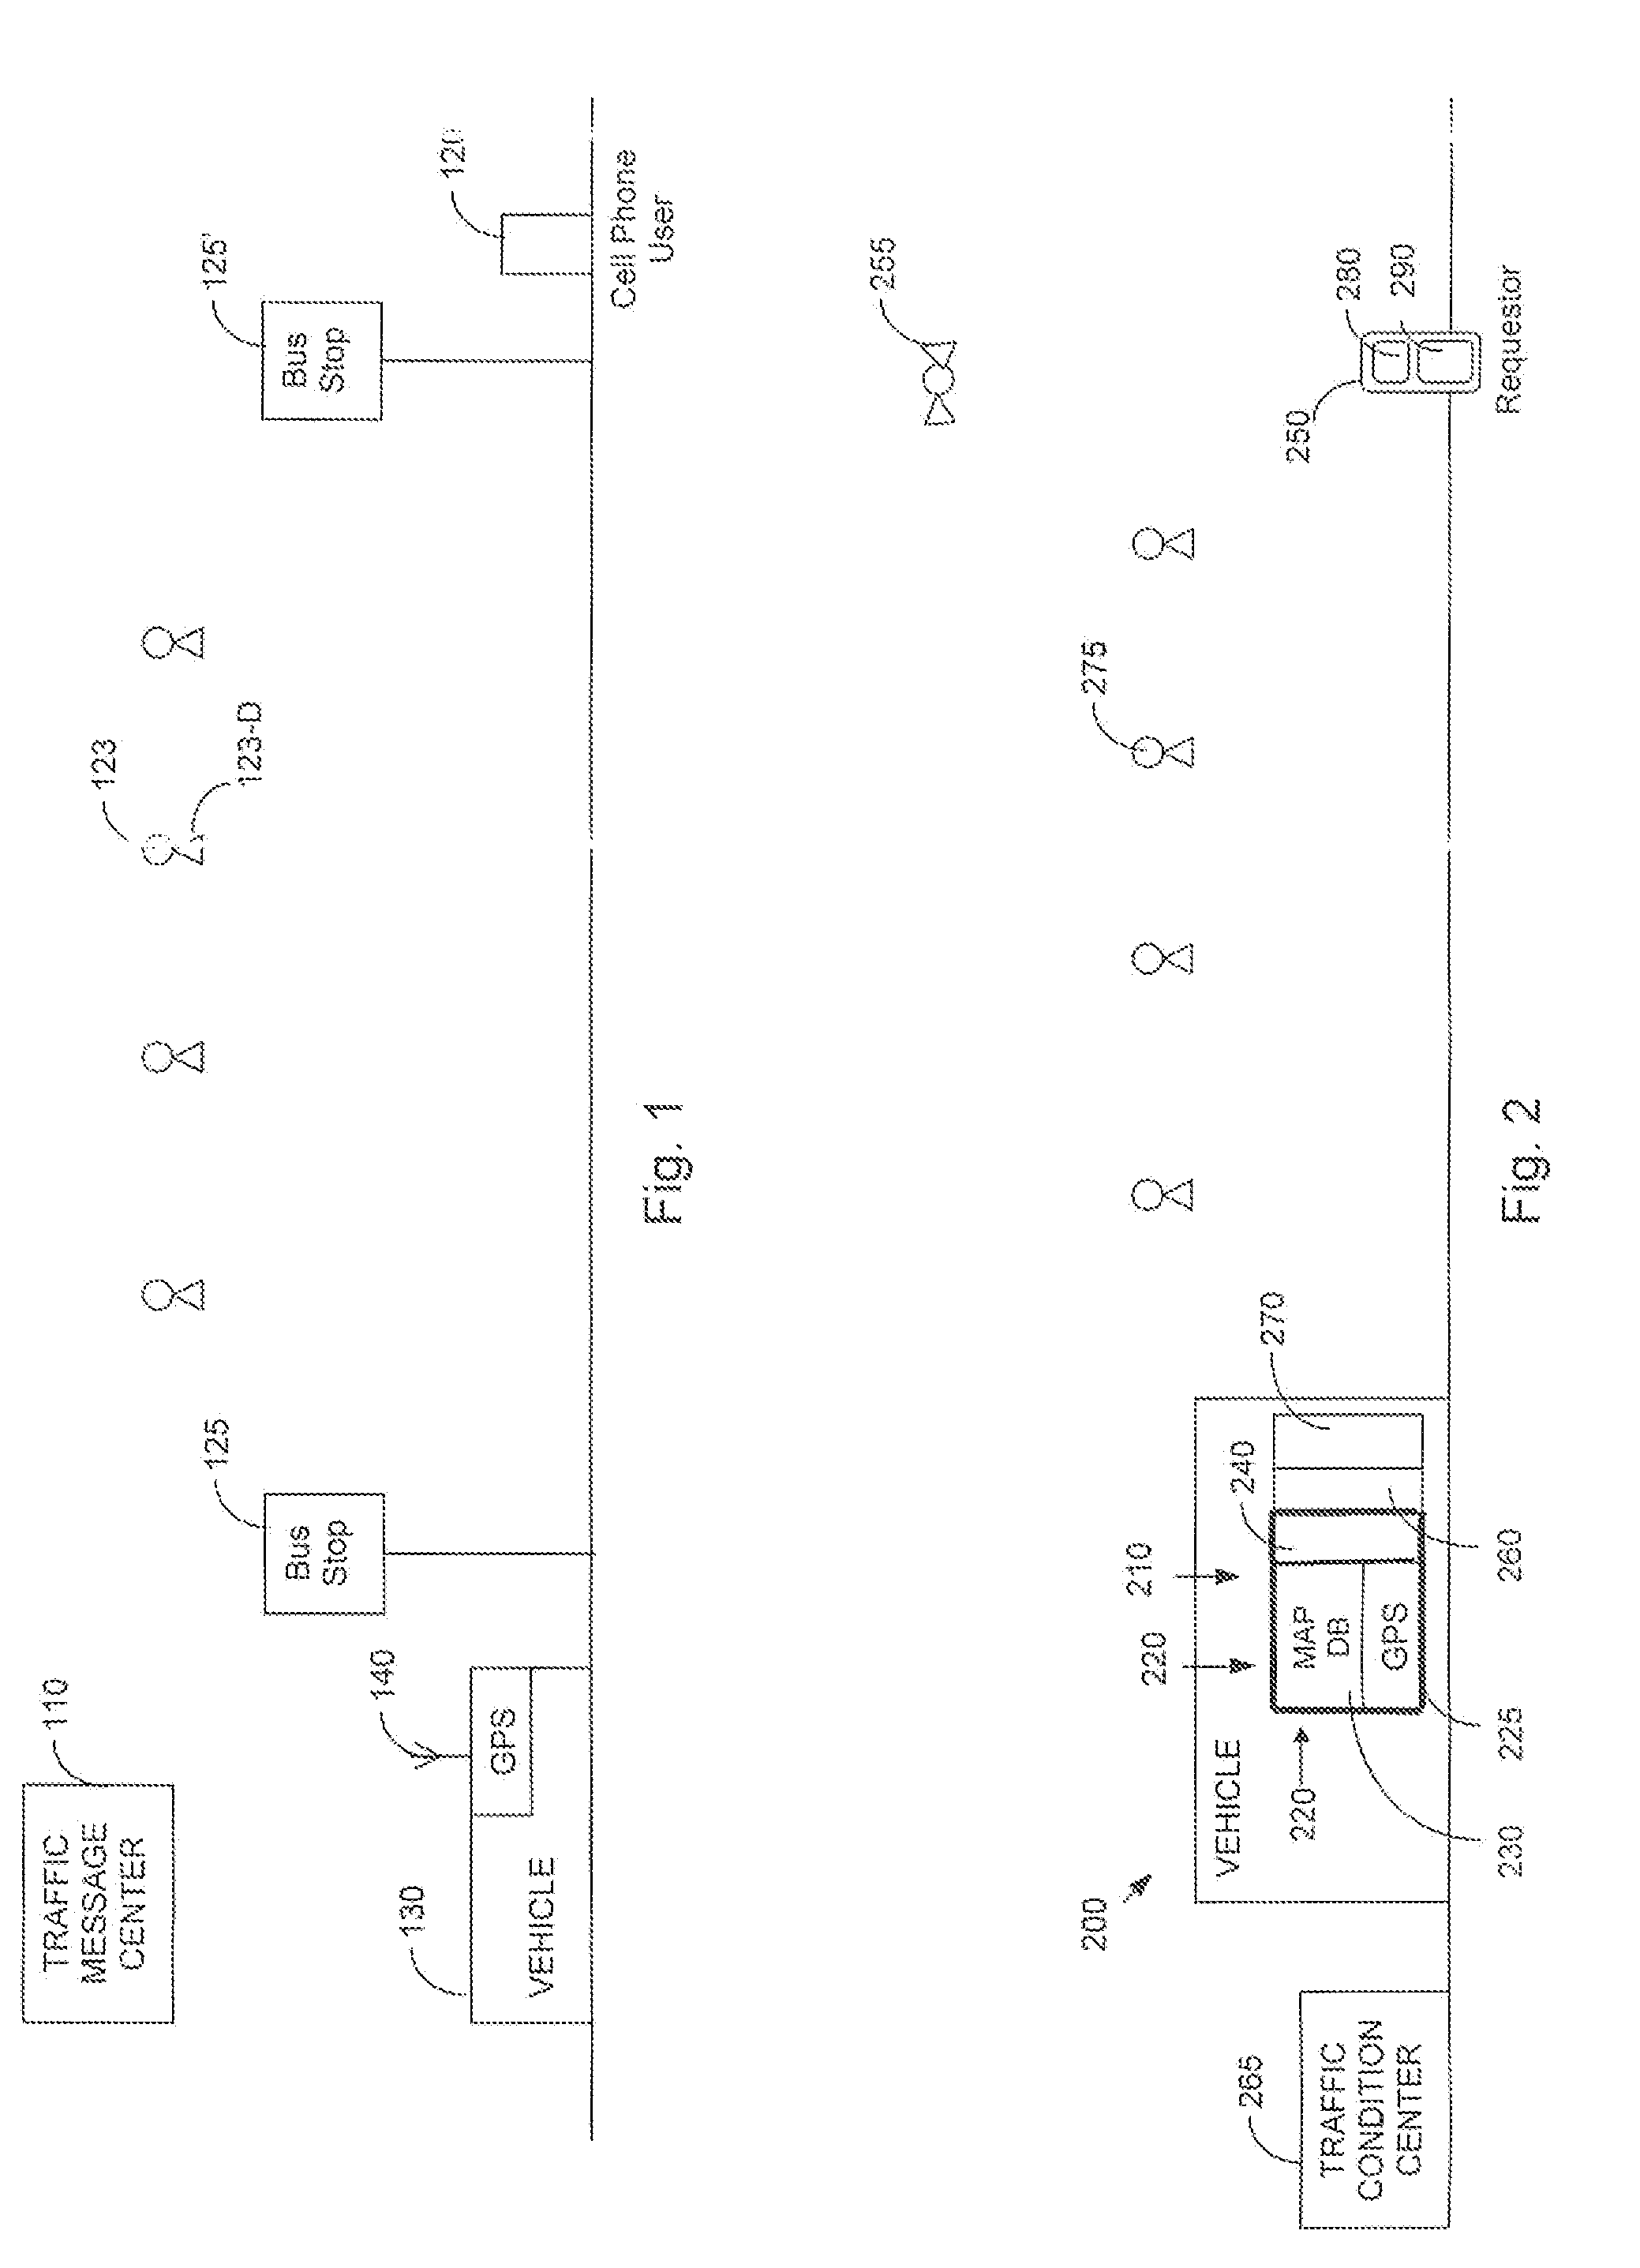 Transmission of wireless messages of current vehicle location and estimated arrival time to requestors